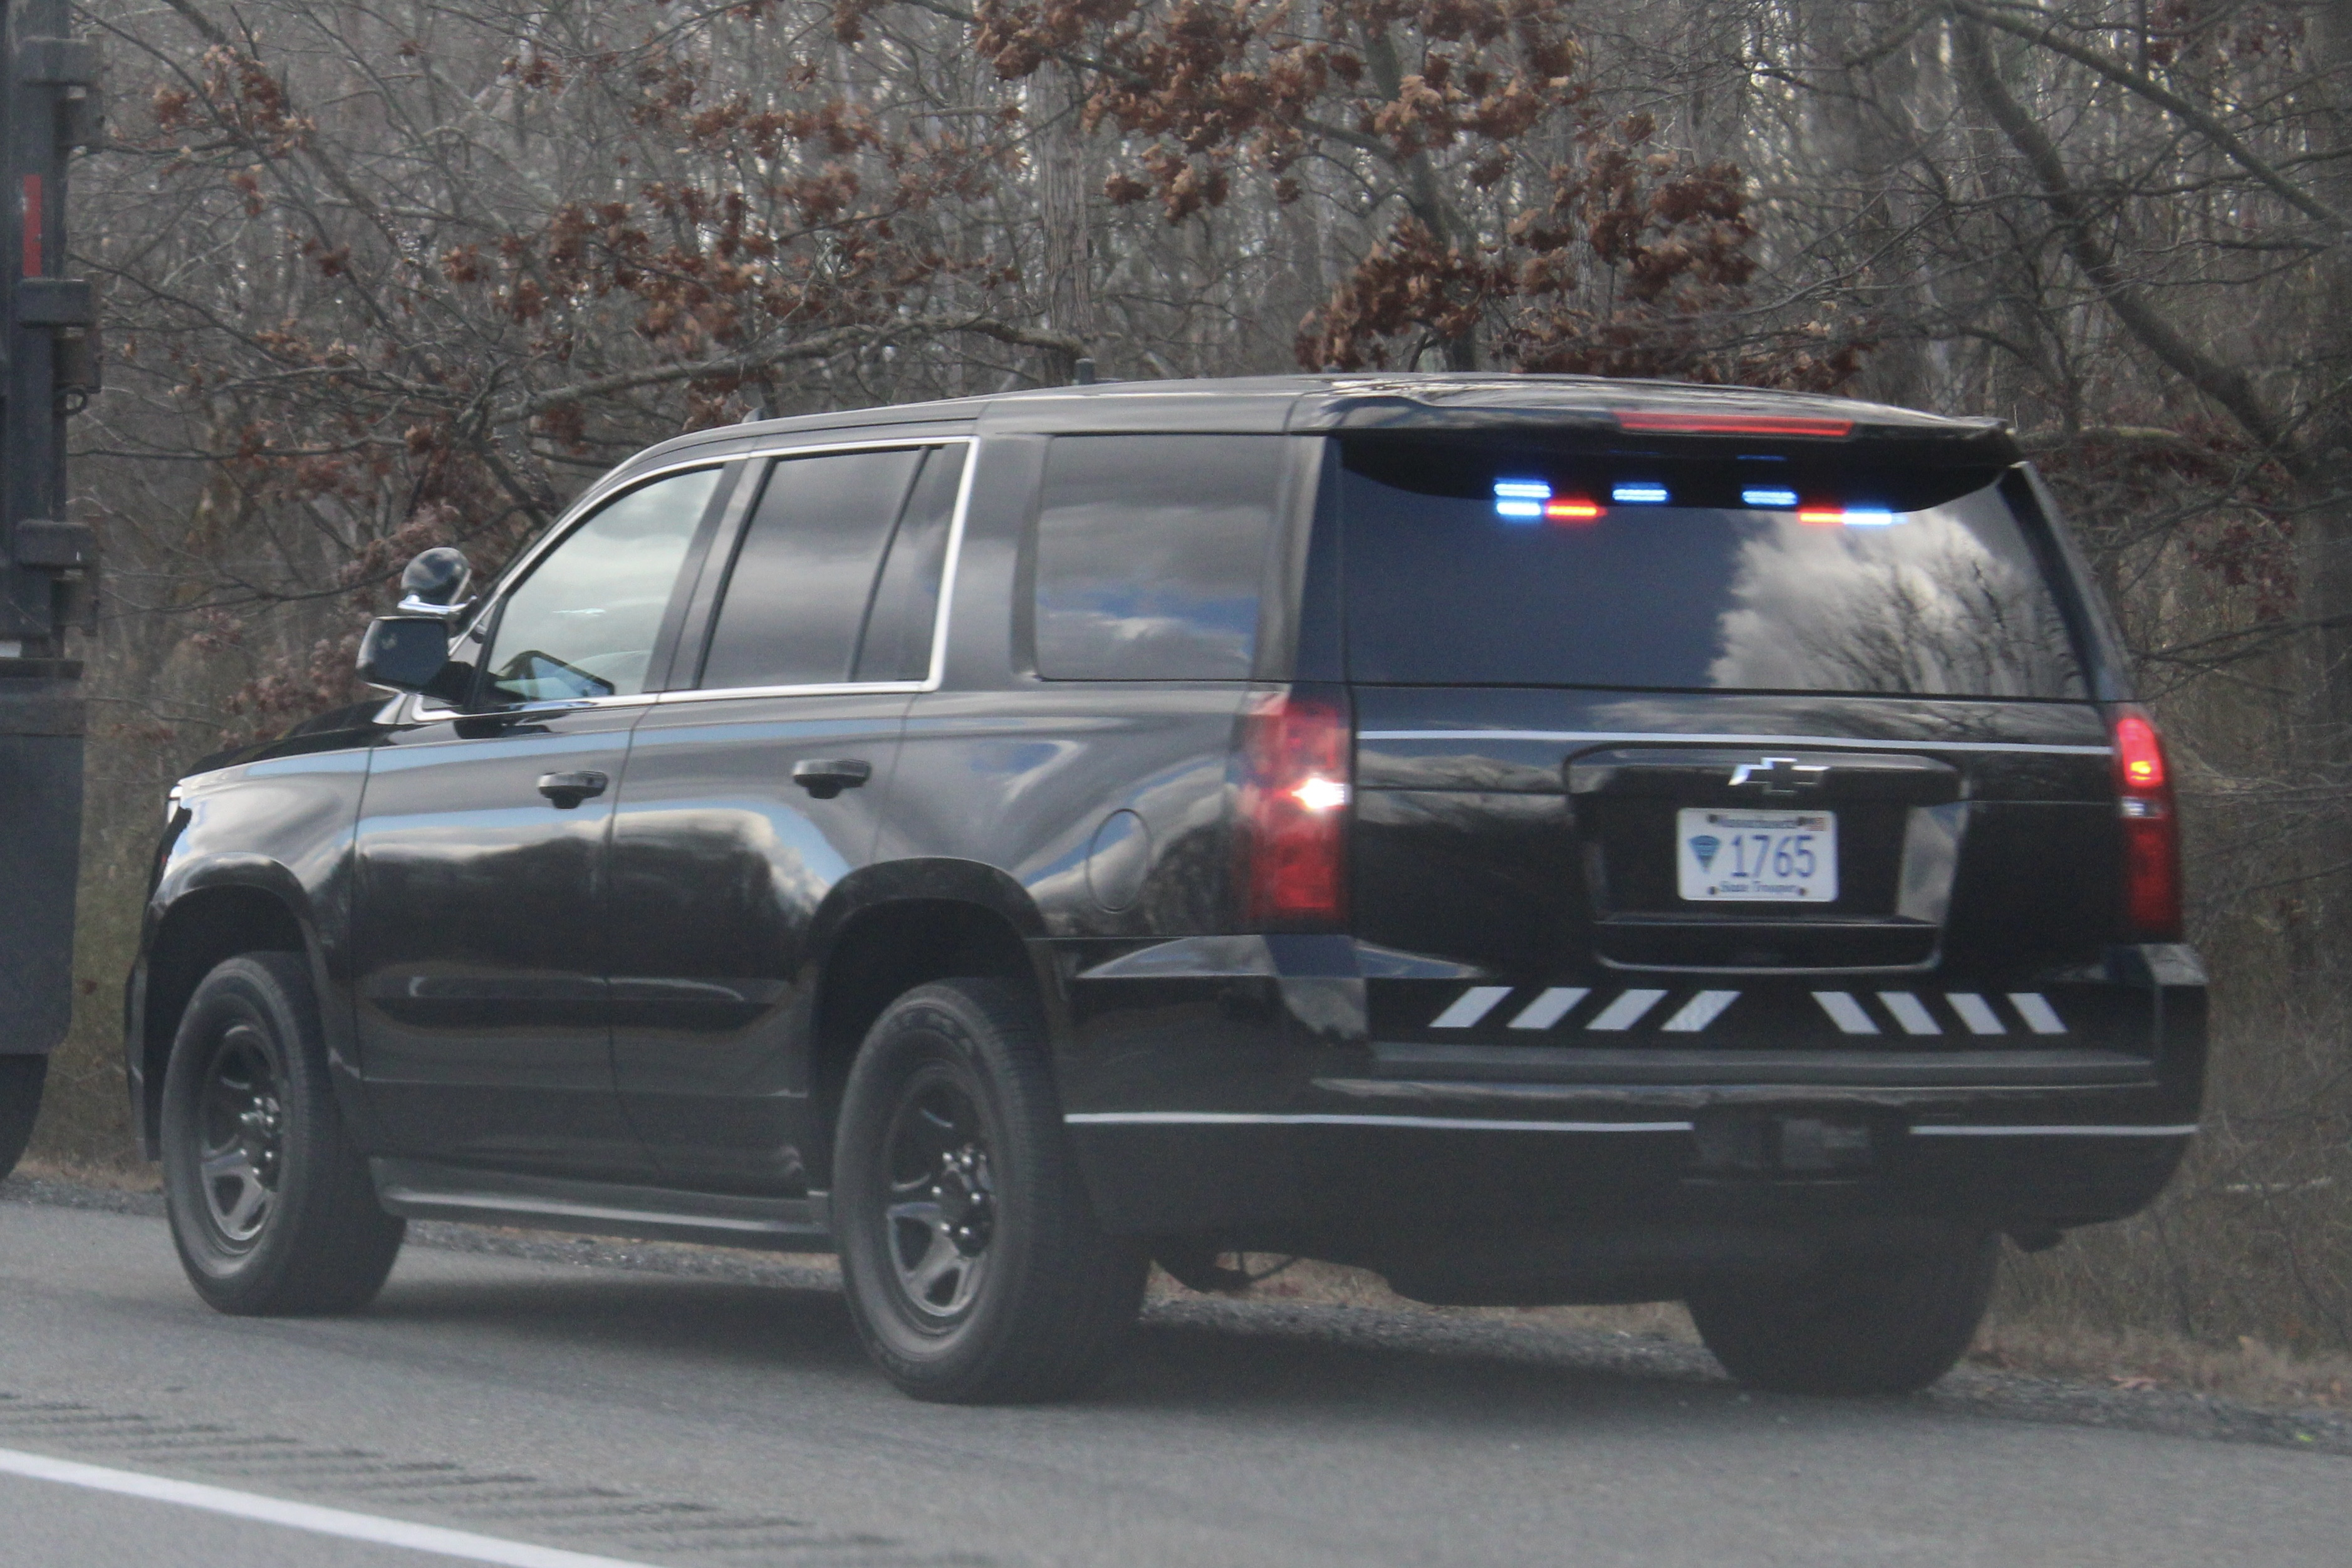 A photo  of Massachusetts State Police
            Cruiser 1765T, a 2018 Chevrolet Tahoe             taken by @riemergencyvehicles